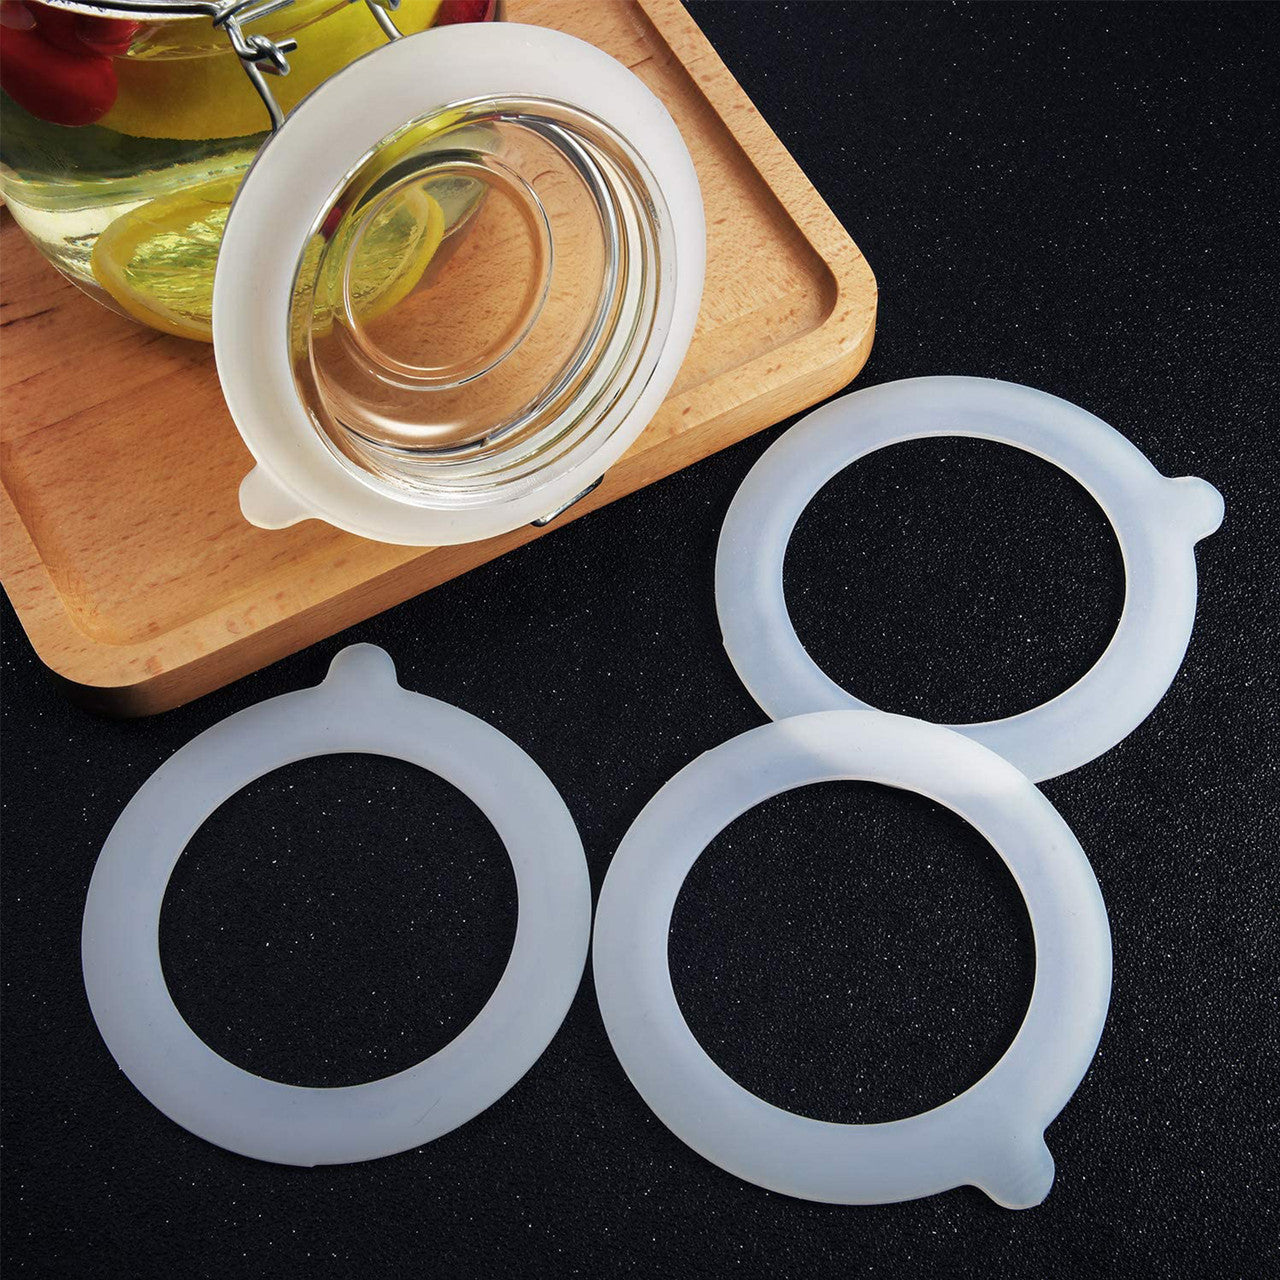 Silicone Replacement Gaskets Seal Rings for Regular Mason Canning Jars, 3.75 Inches (White), 12Pcs